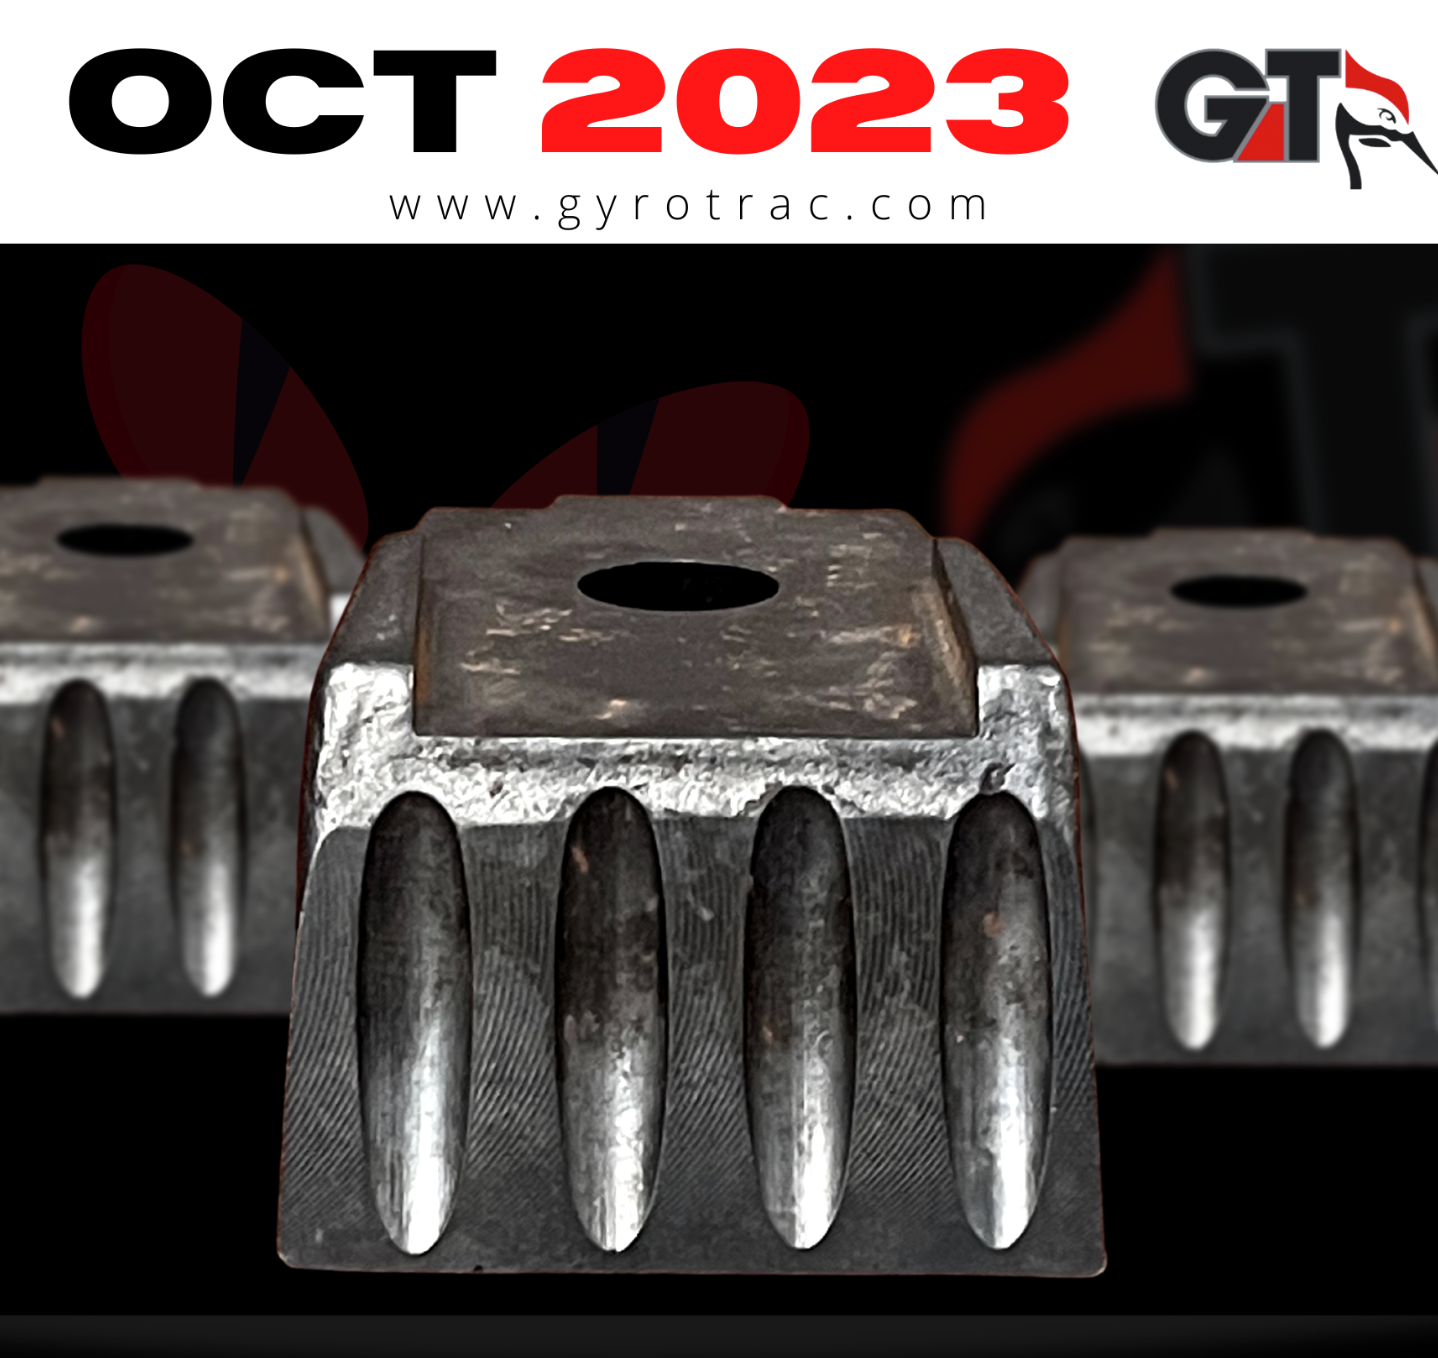 October 2023 Parts Sale: Buy One Cutter-Head Teeth Set, Get Second 15% Off!